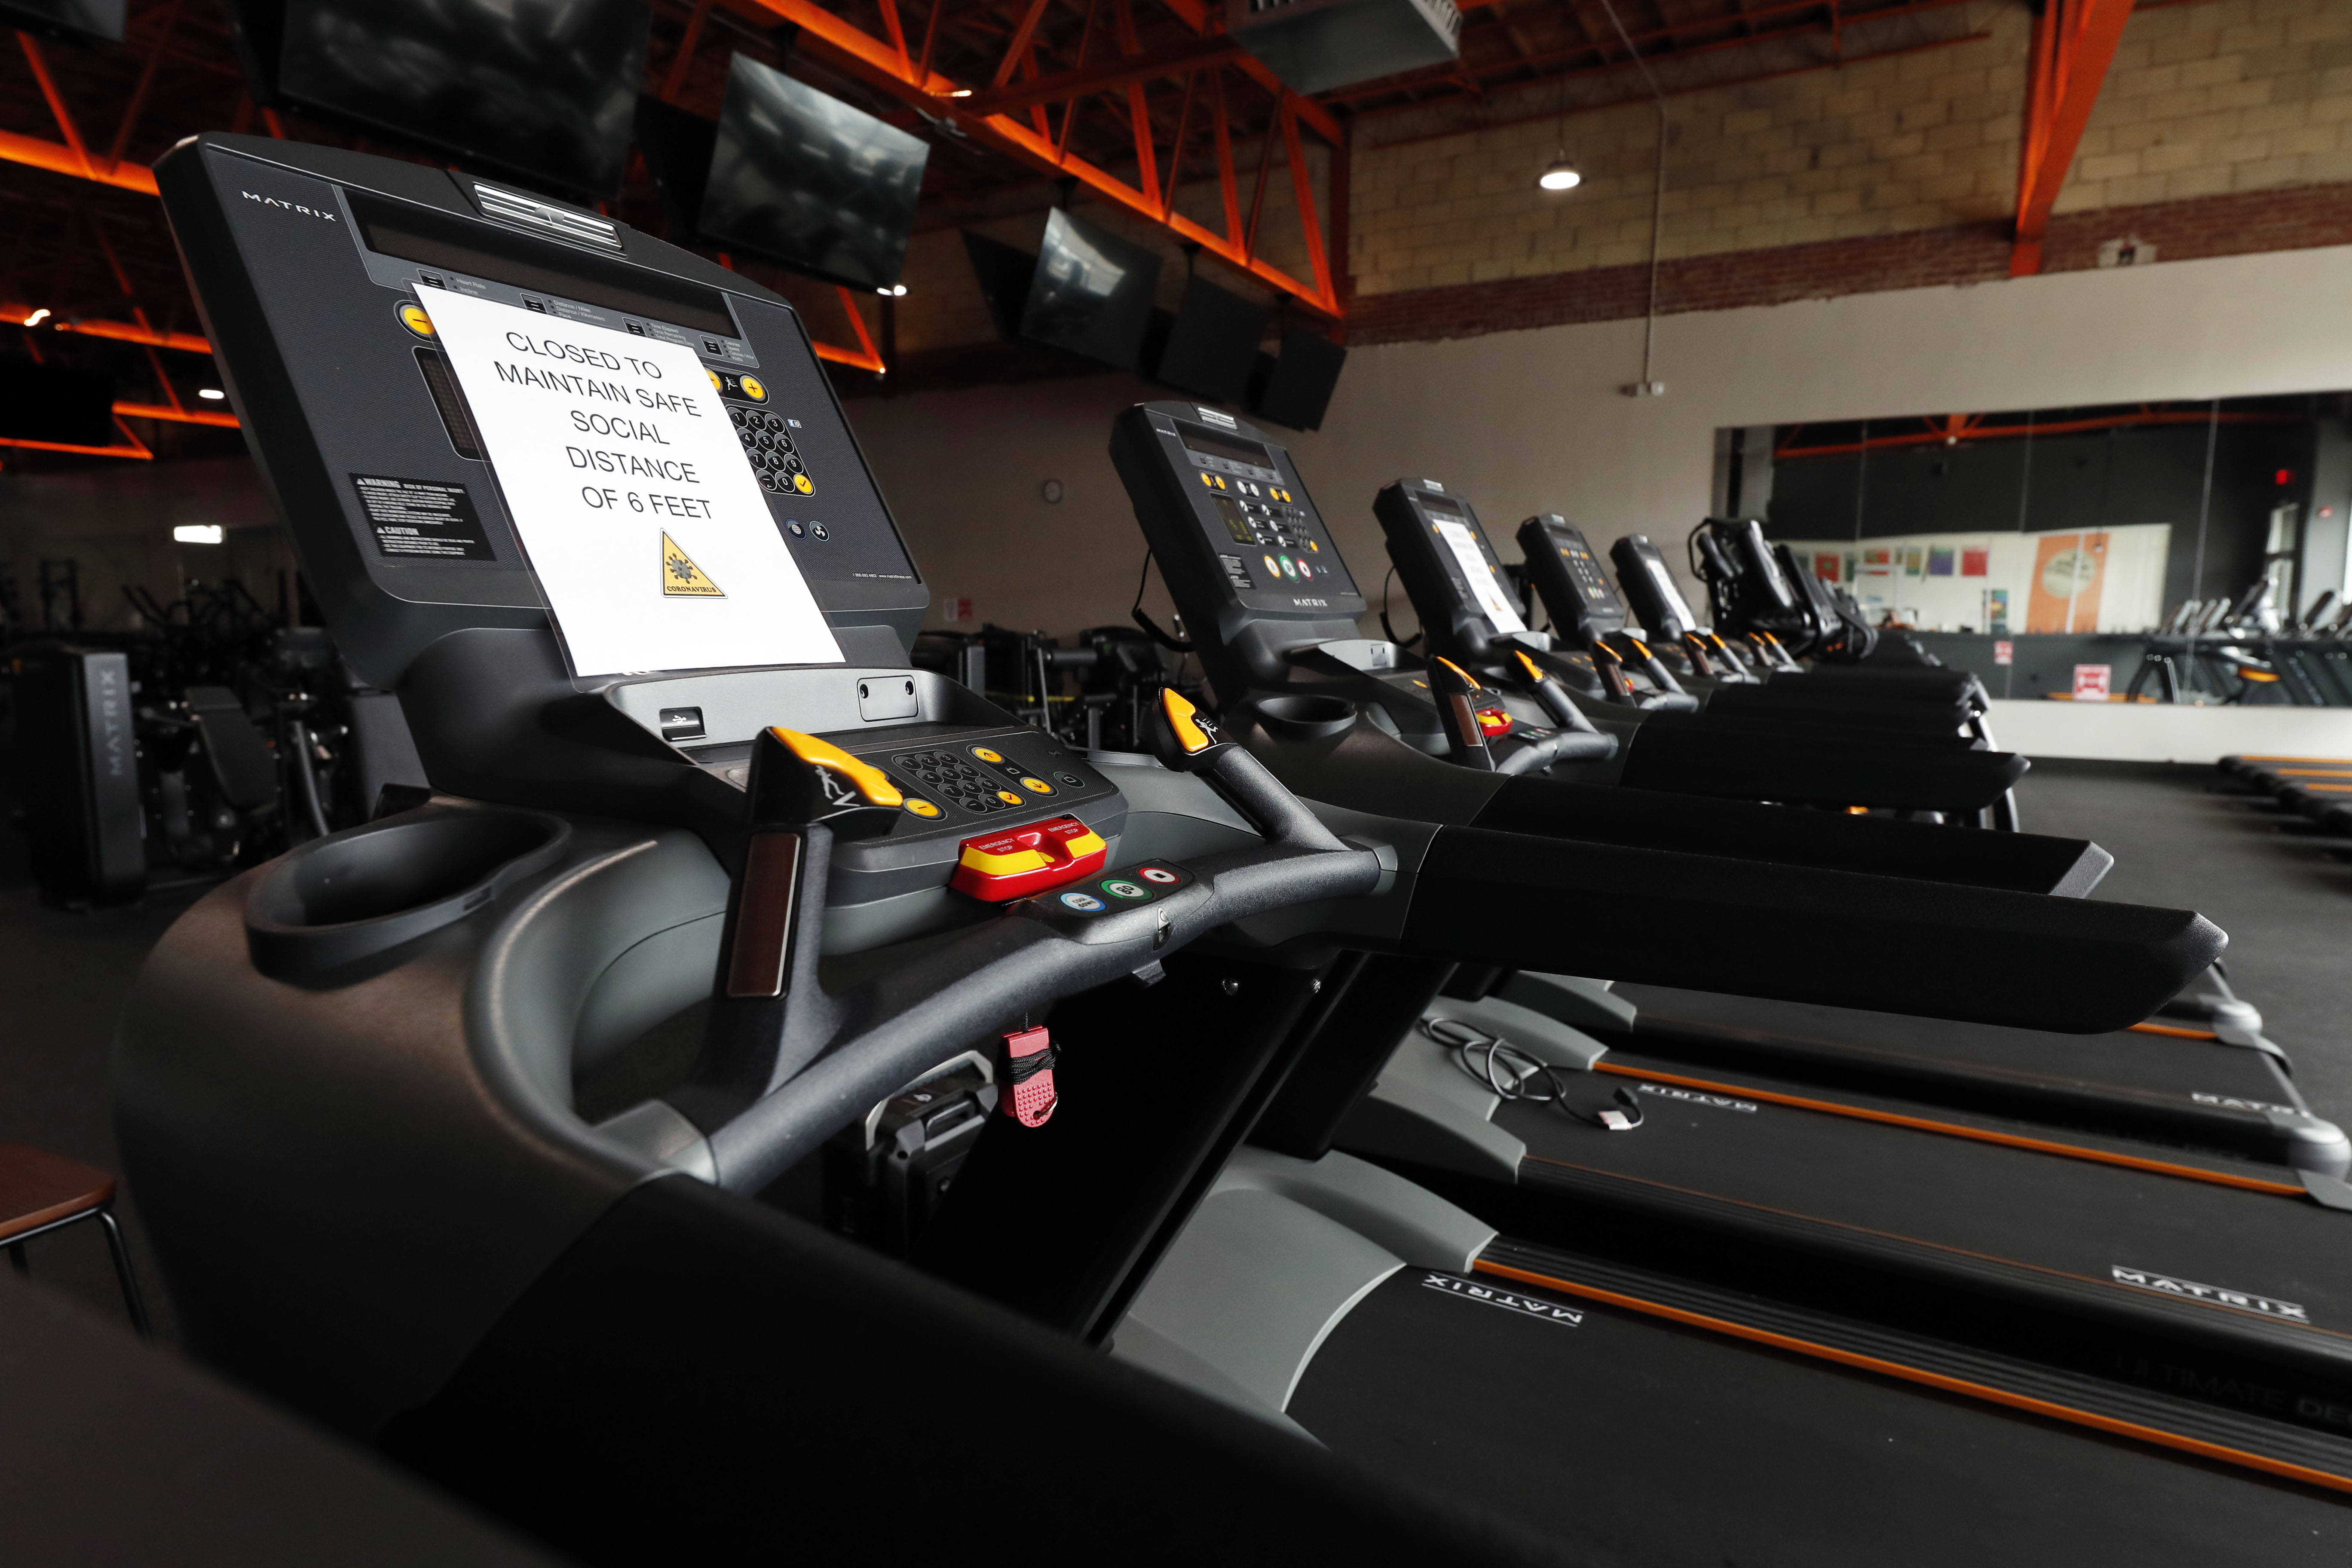 Some elliptical machines and treadmills are disconnected to provide distance at Fondren Fitness in Jackson, Mississippi, on May 14. The city of Jackson is allowing gyms and fitness centers to reopen with restrictions on May 15.